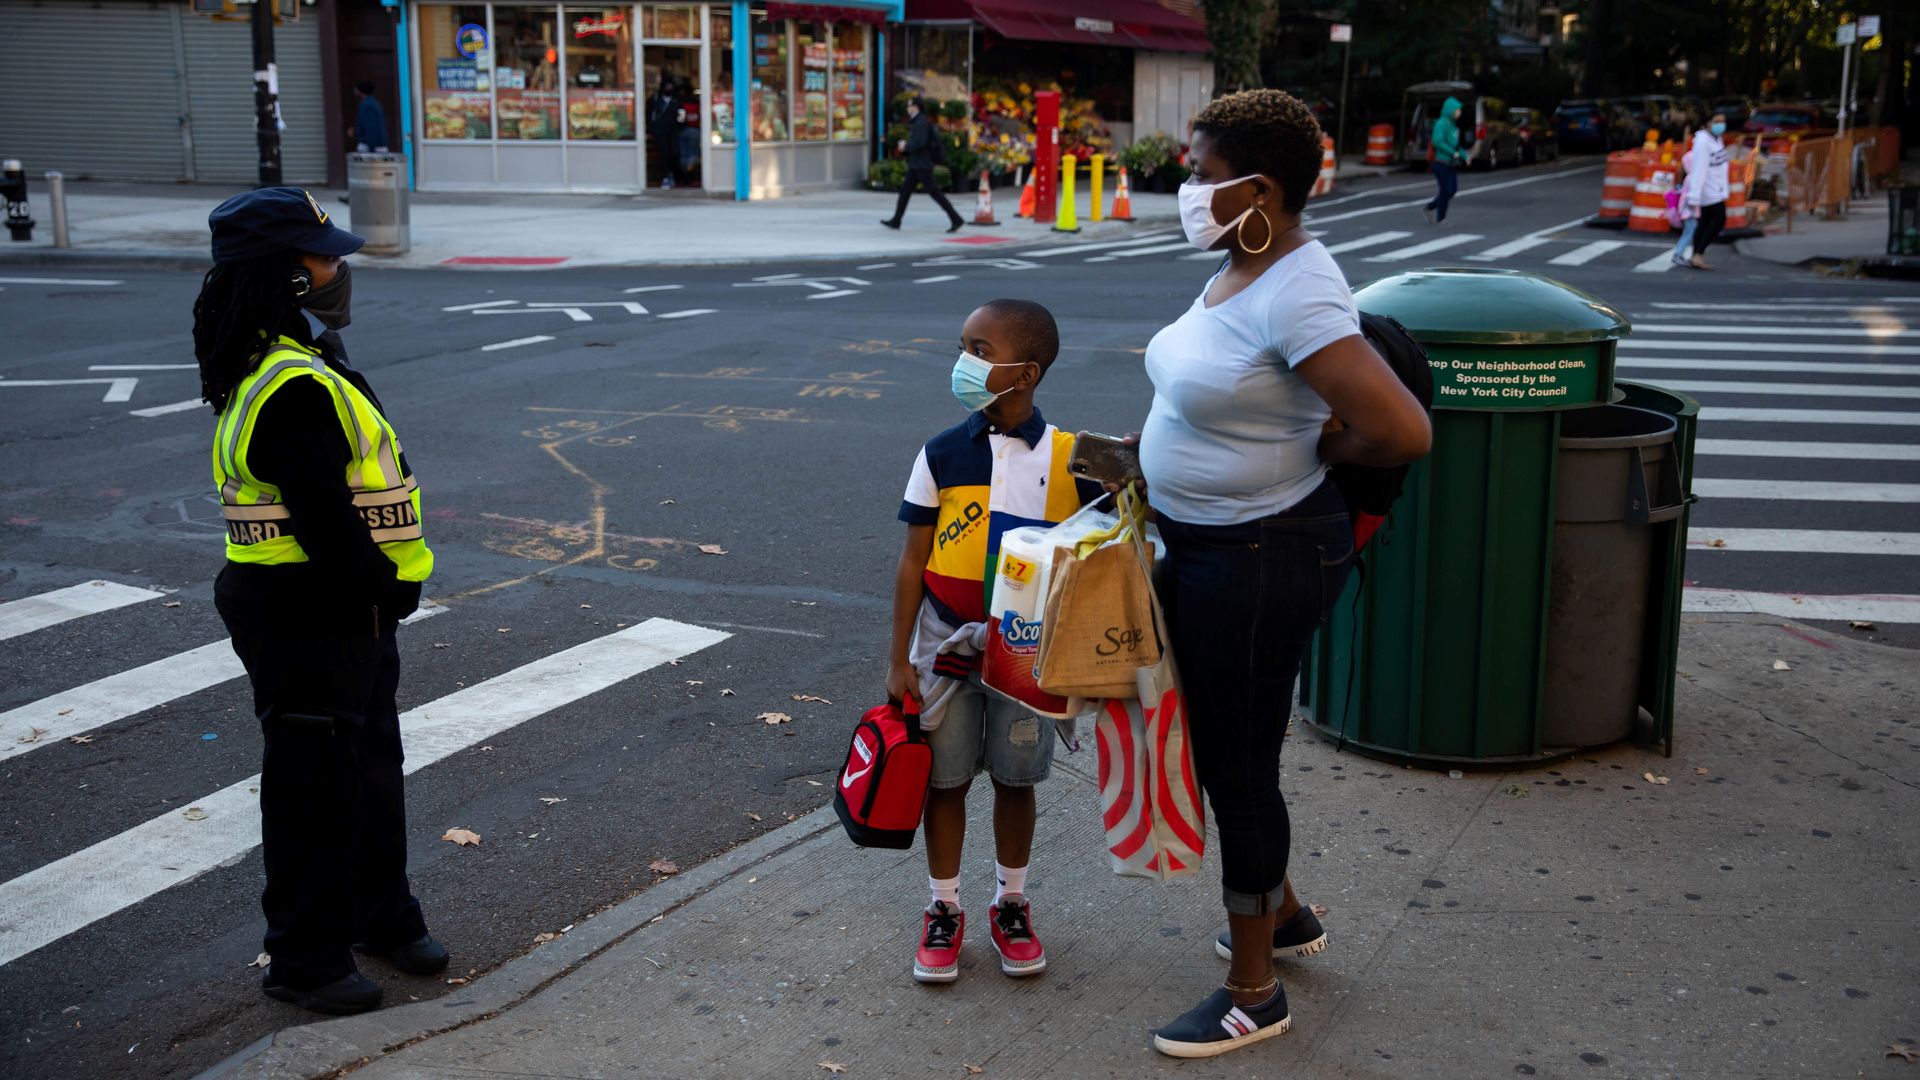 A student stands by his mother while holding a lunchbox and his backpack, while a crossing guard in a bright yellow vest stands near them and the street